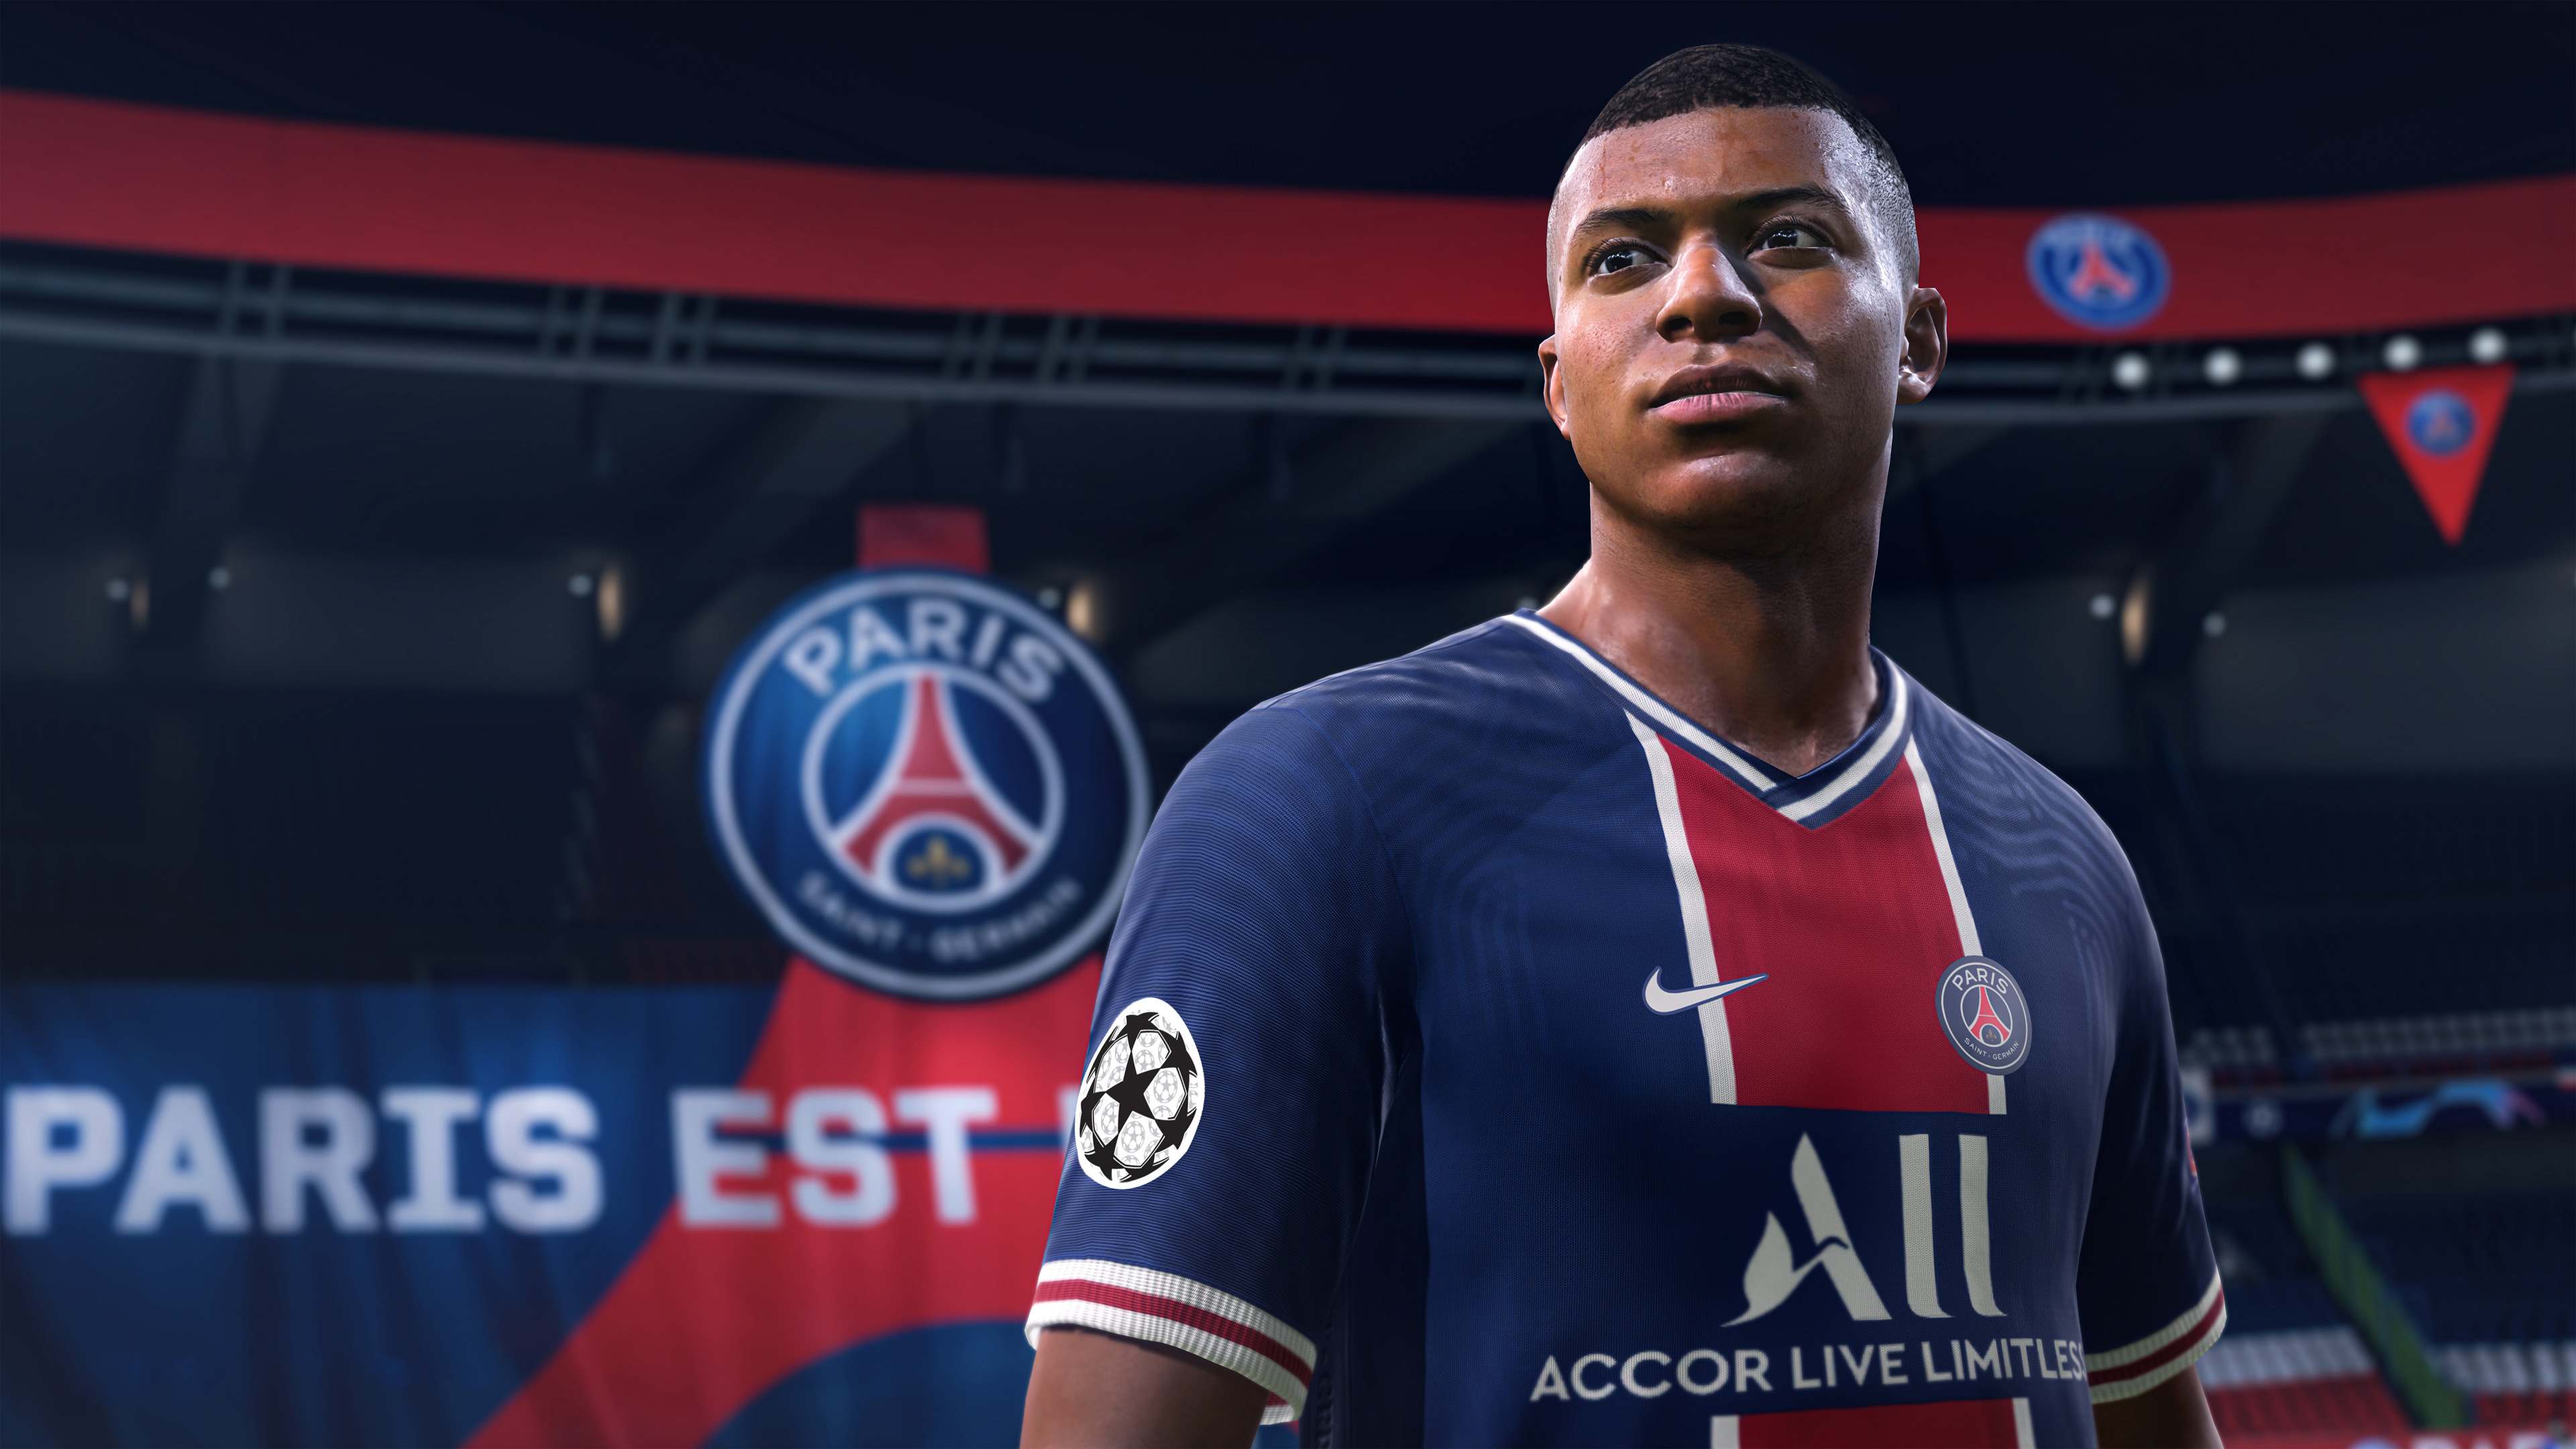 2560x1440 Fifa 21 Kylian Mbappe 4k 2560x1440 Resolution Wallpaper Hd Games 4k Wallpapers Images Photos And Background Wallpapers Den